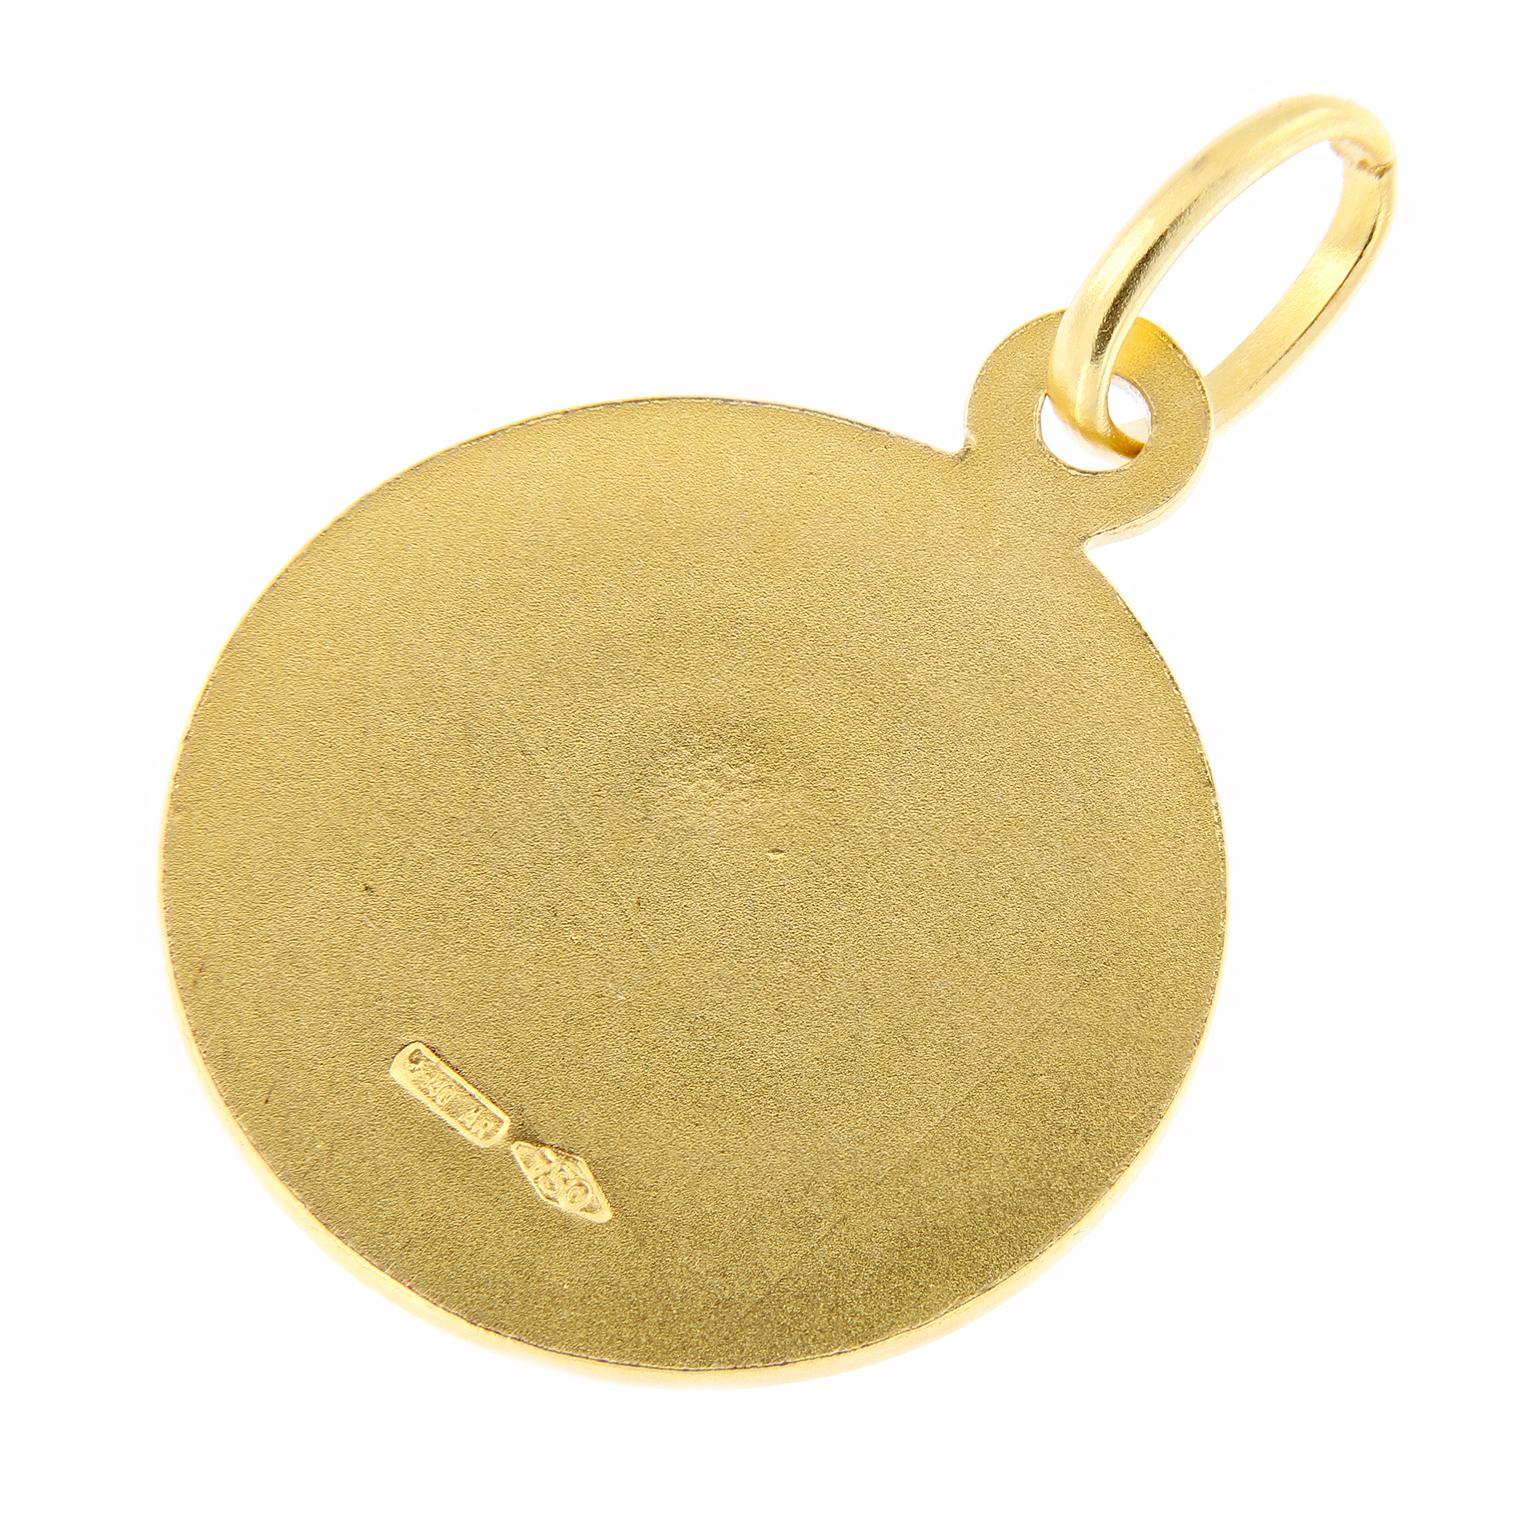 This round Jesus pendant is made of polished 18 karat yellow gold. Diameter: 12mm. Weighs 2.4 grams.